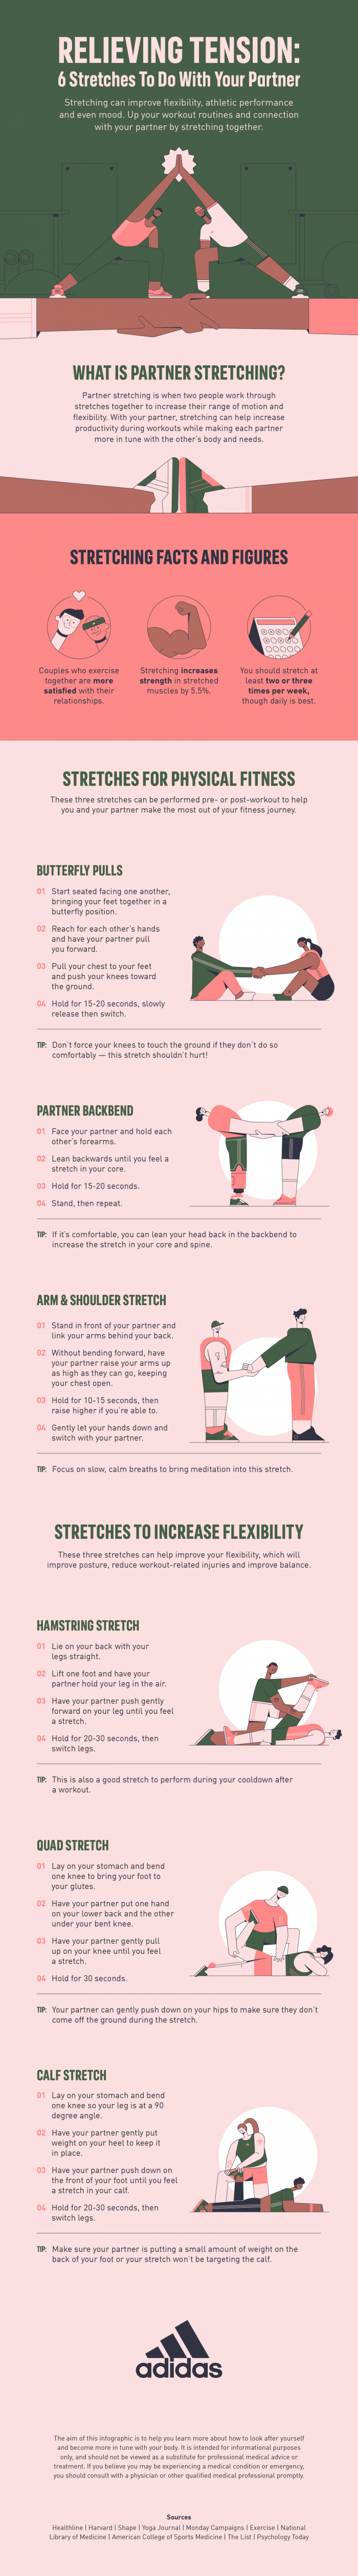 Stretches to Do With Your Partner